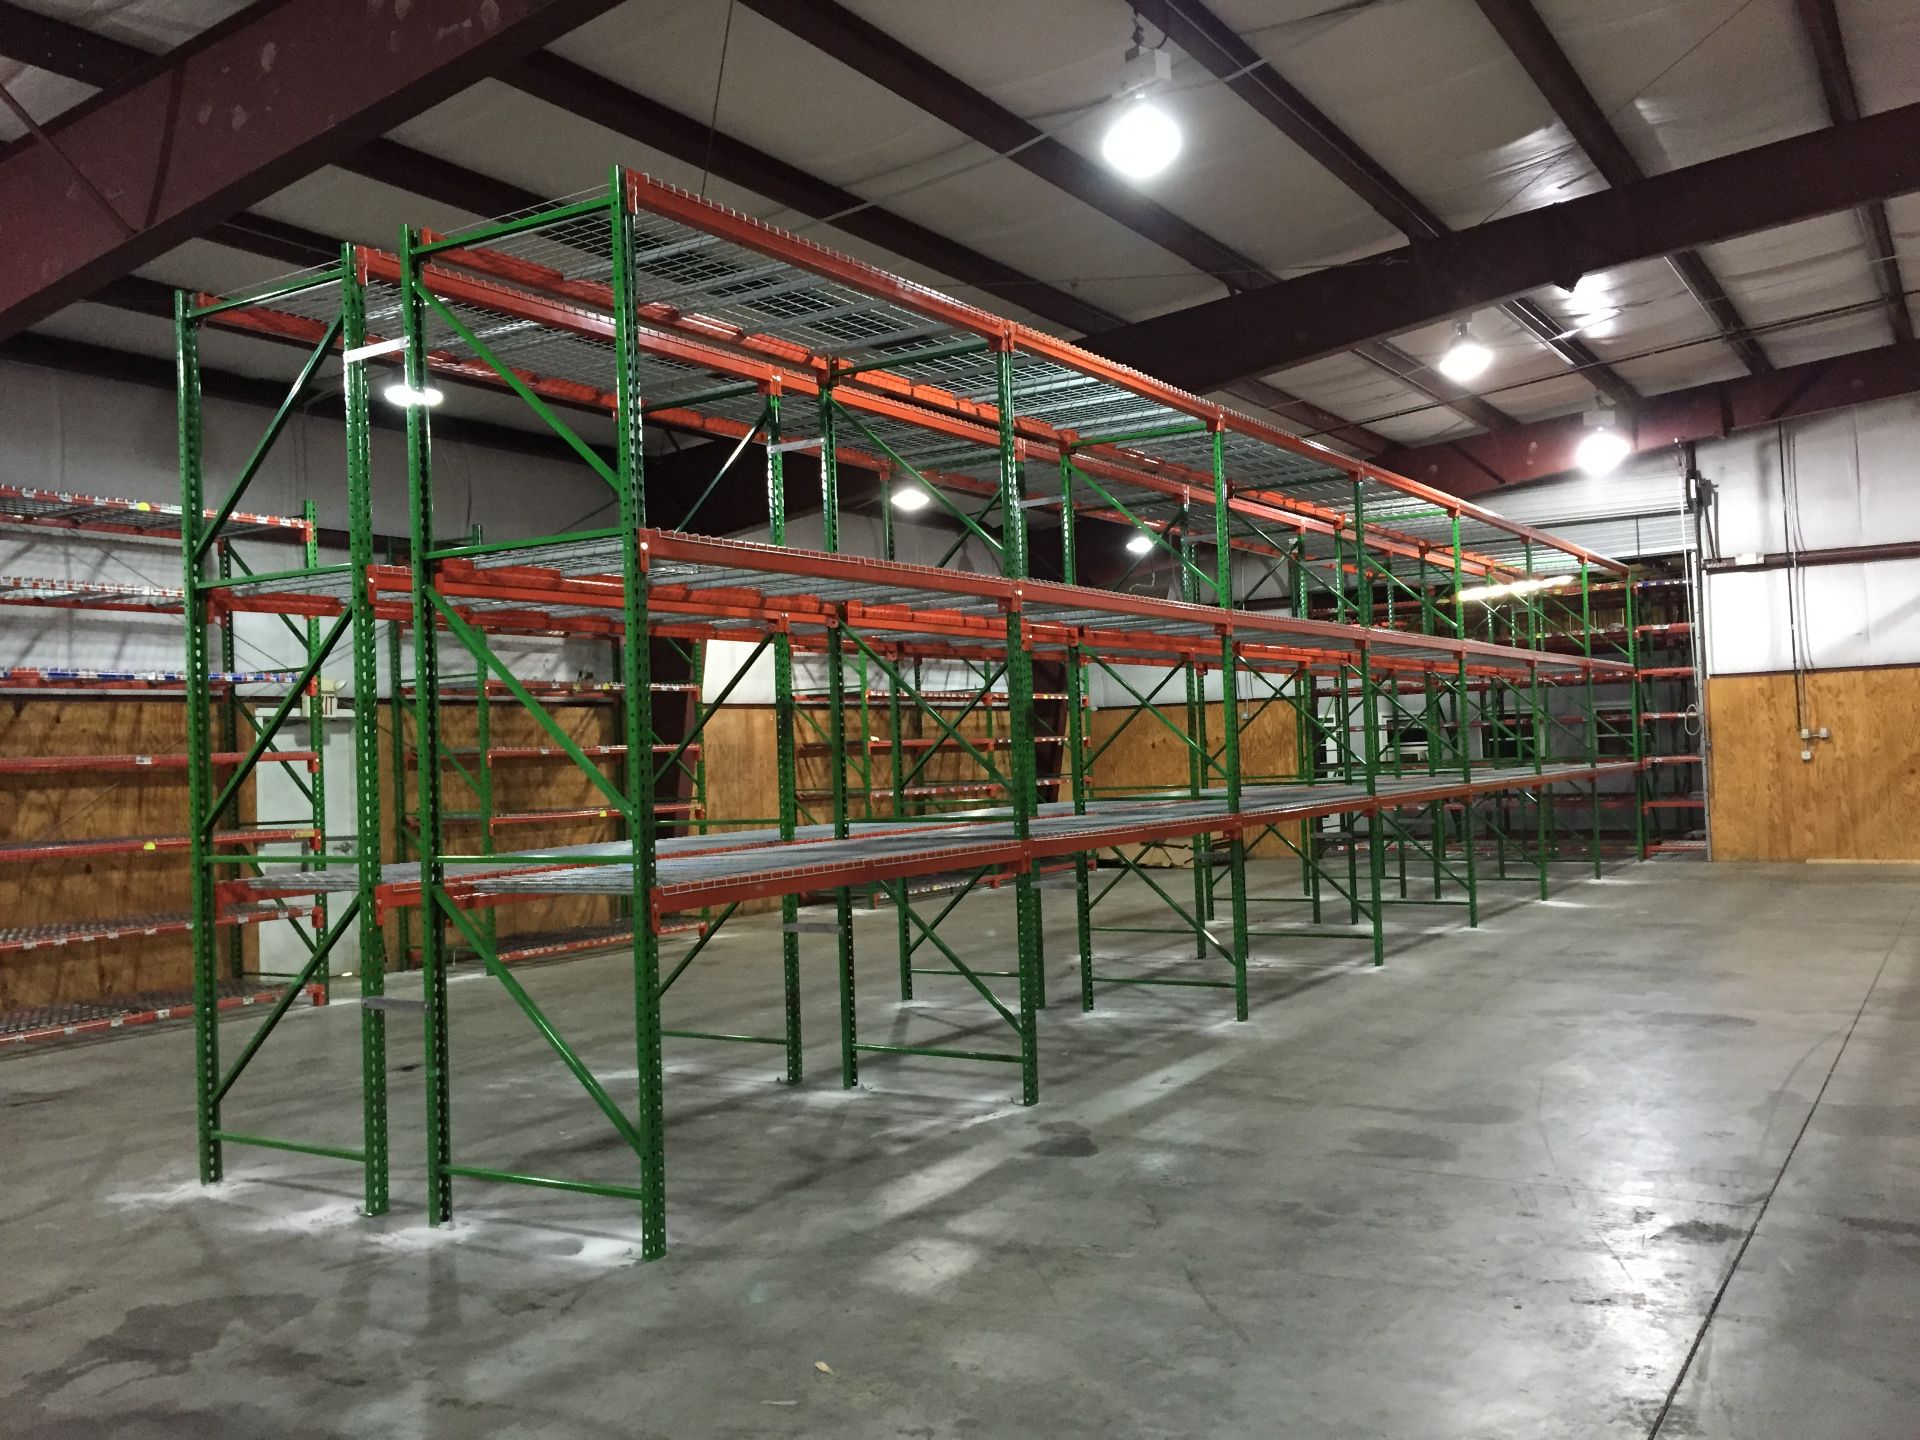 LIKE NEW TEAR DROP STYLE PALLET RACK WITH WIRE DECKING. SIZE: 144"H X 96"L X 42"D, FULL TRUCK LOAD